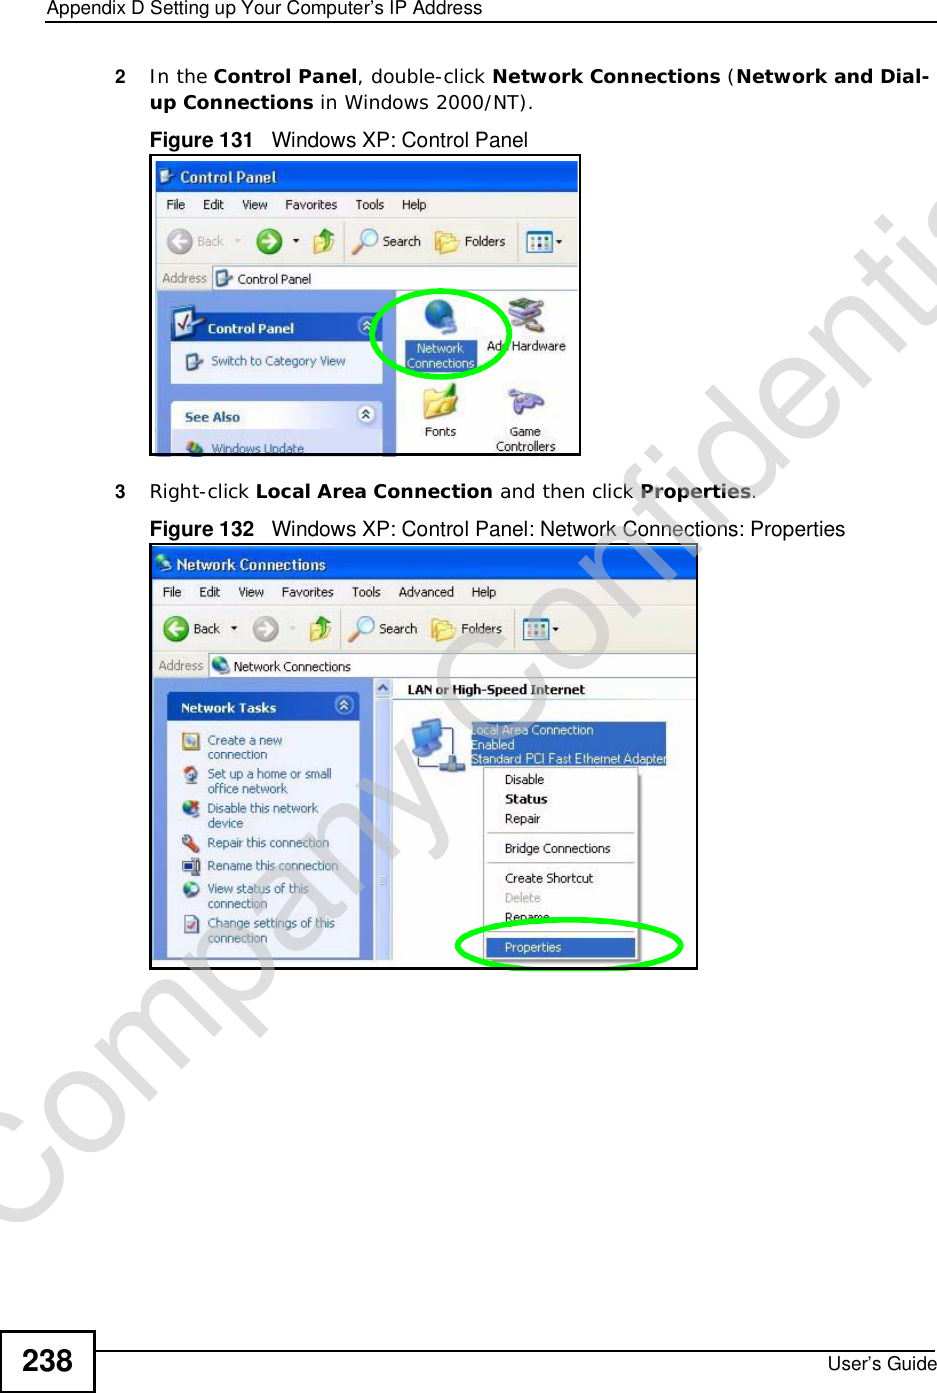 Appendix DSetting up Your Computer’s IP AddressUser’s Guide2382In the Control Panel, double-click Network Connections (Network and Dial-up Connections in Windows 2000/NT).Figure 131   Windows XP: Control Panel3Right-click Local Area Connection and then click Properties.Figure 132   Windows XP: Control Panel: Network Connections: PropertiesCompany Confidential